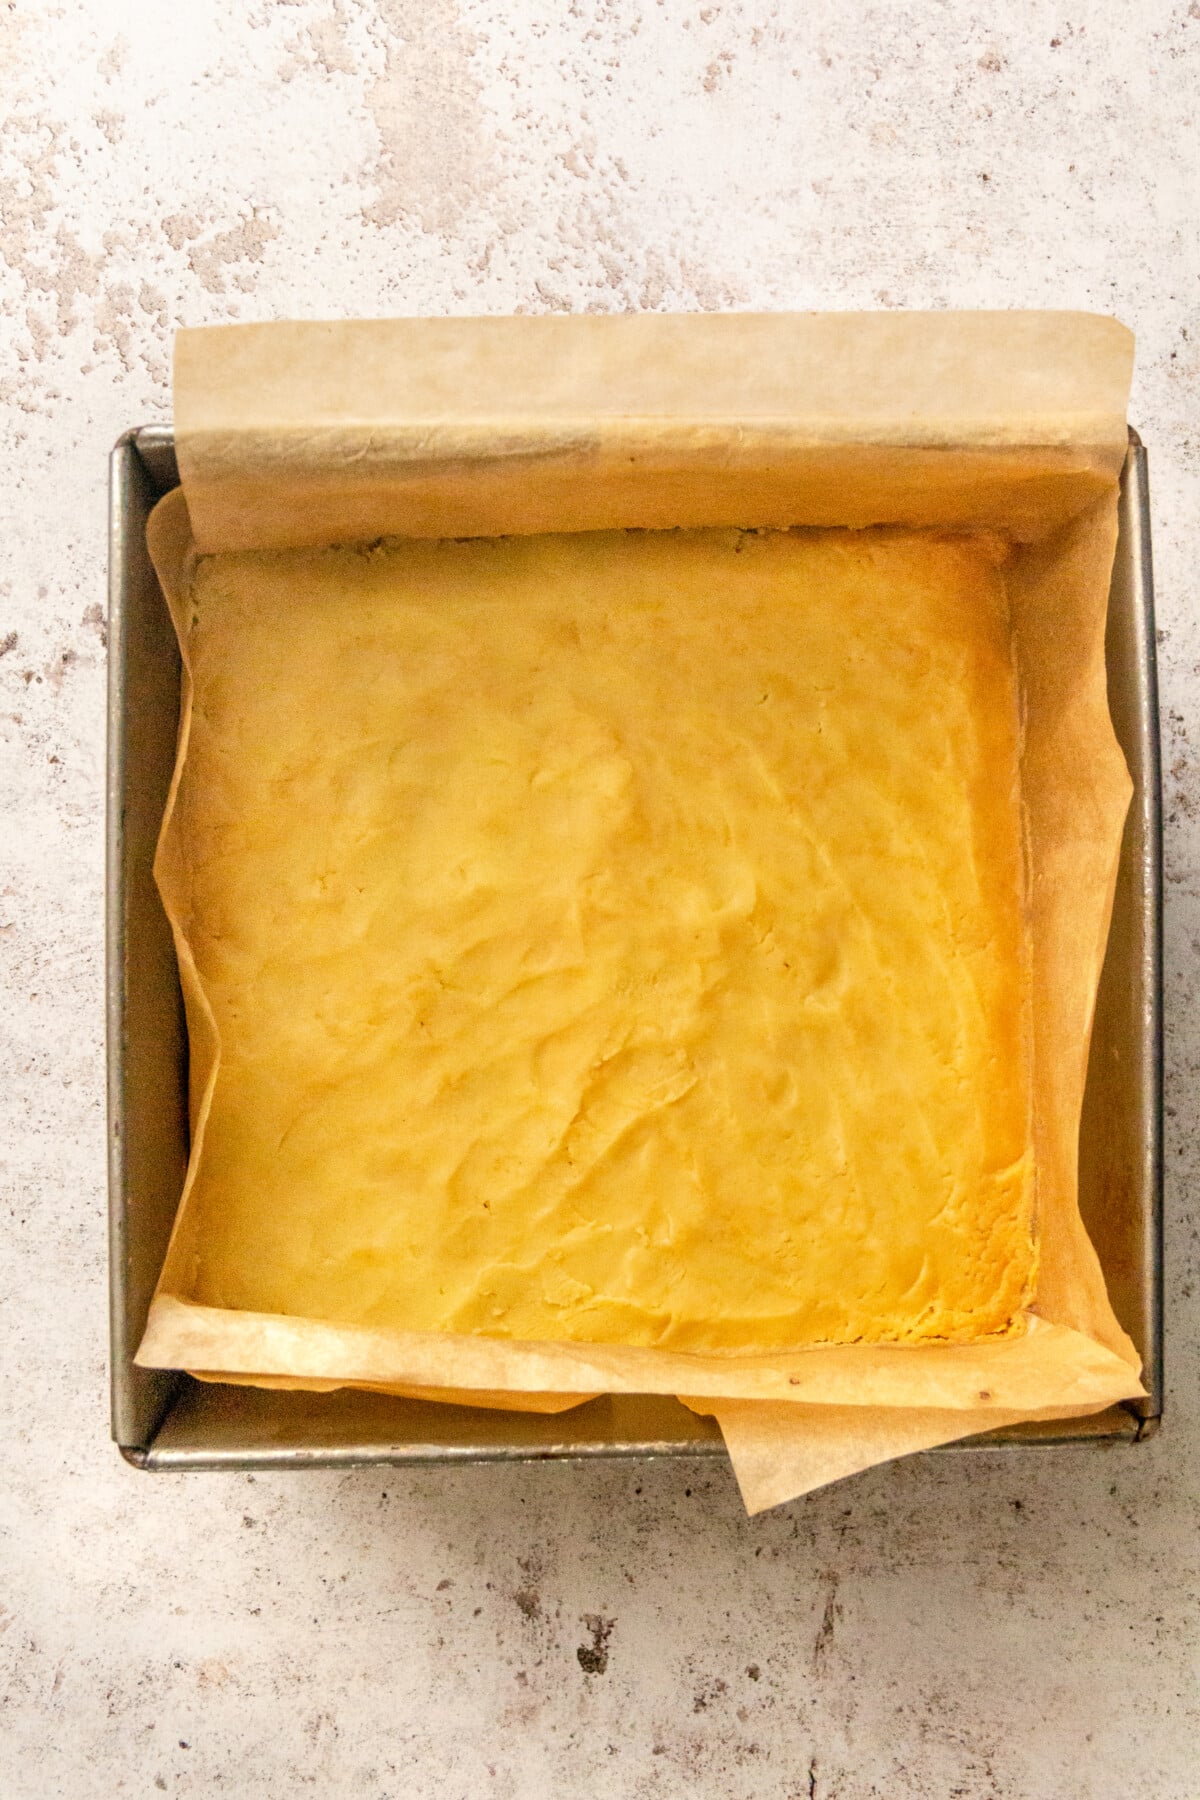 A light yellow colored crust sits in the bottom of the pan.